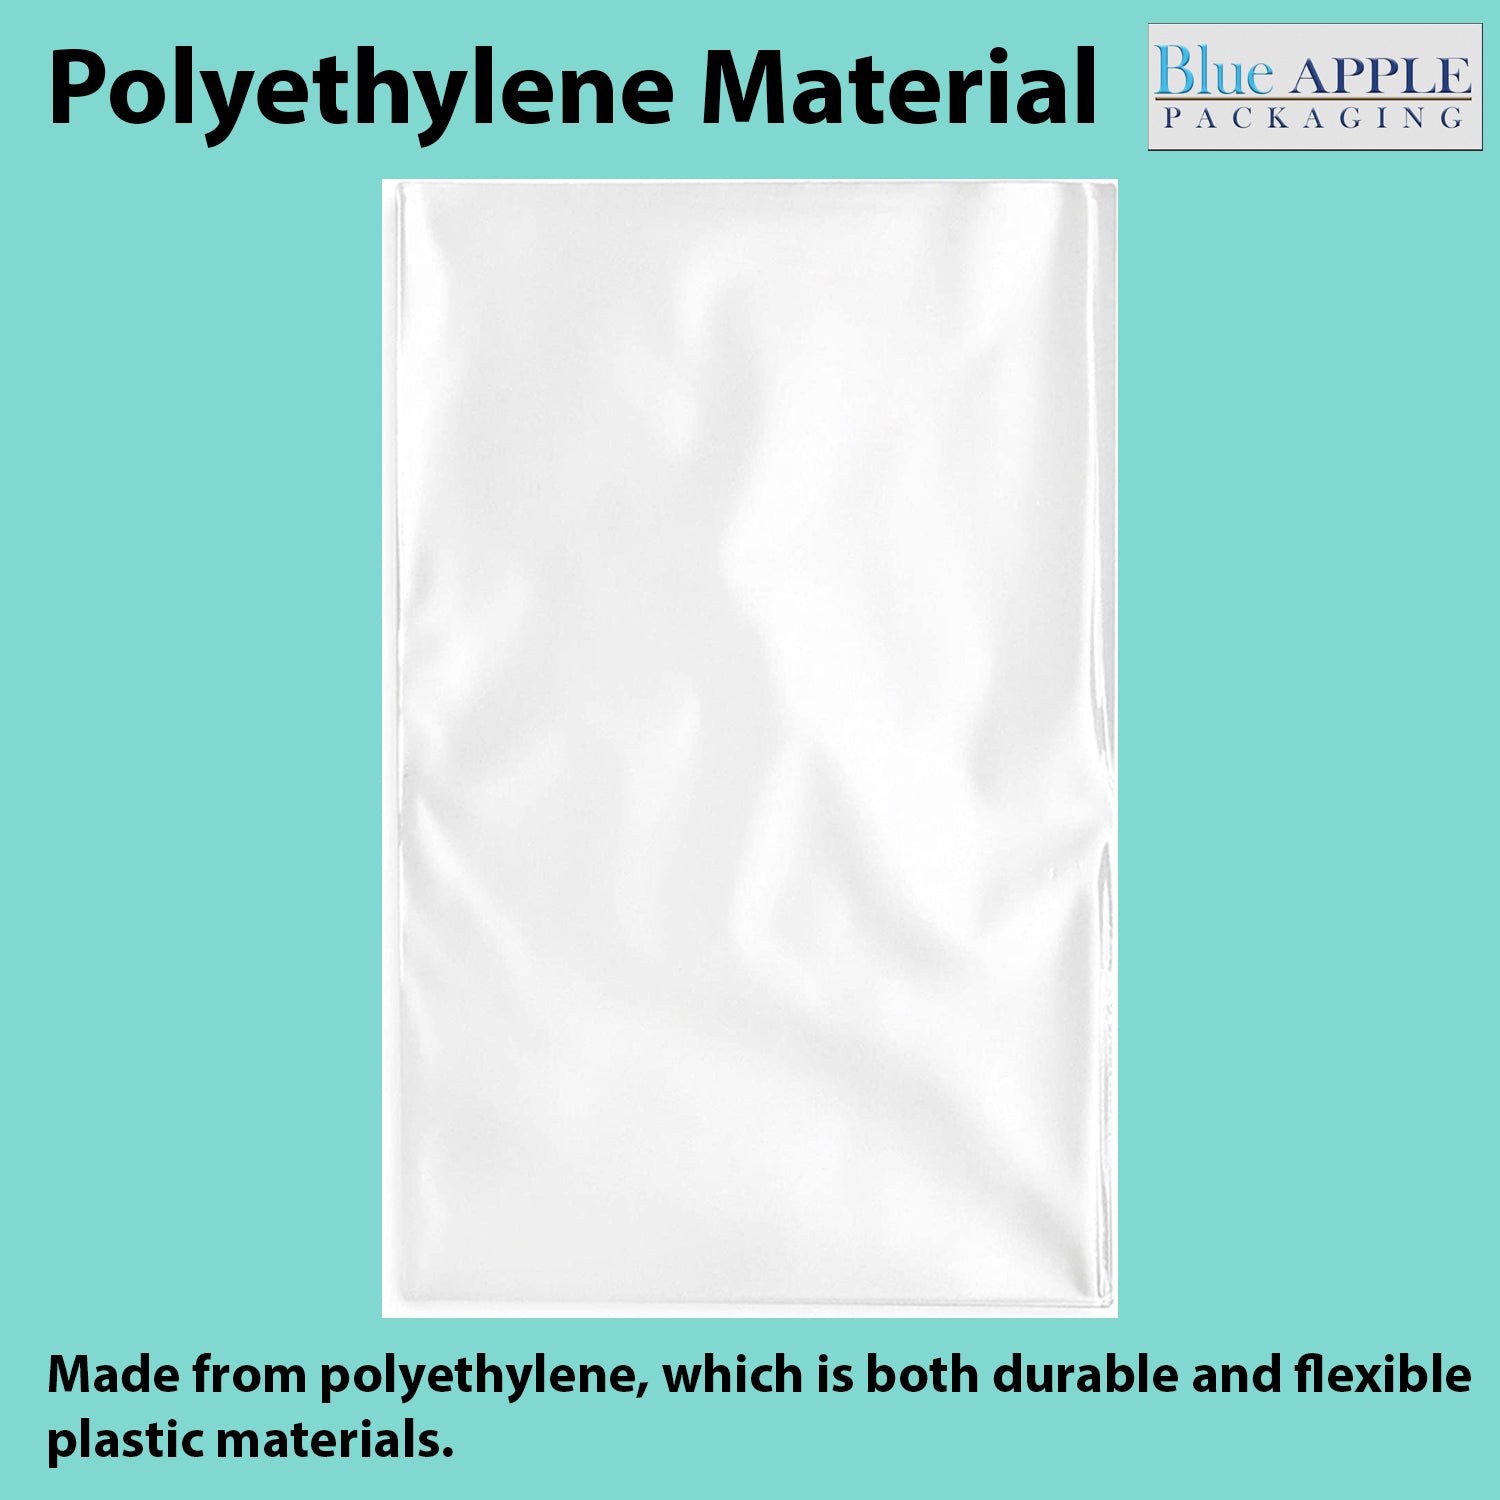 Clear Poly Bags 4Mil 16X16 Flat Open Top (LDPE)